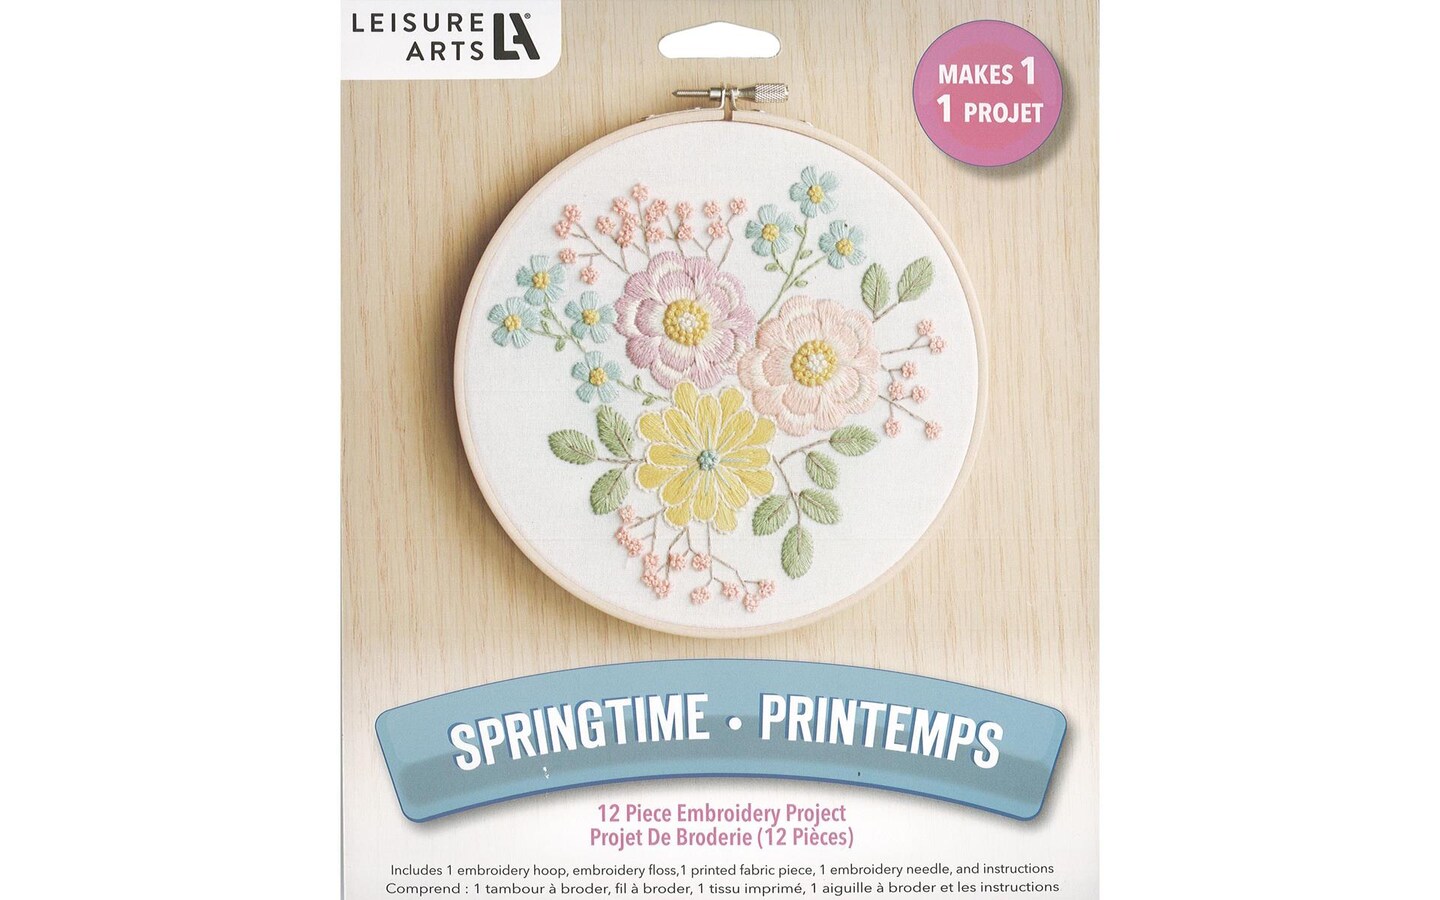 Leisure Arts Embroidery Kit 6 Springtime - embroidery kit for beginners - embroidery  kit for adults - cross stitch kits - cross stitch kits for beginners - embroidery  patterns